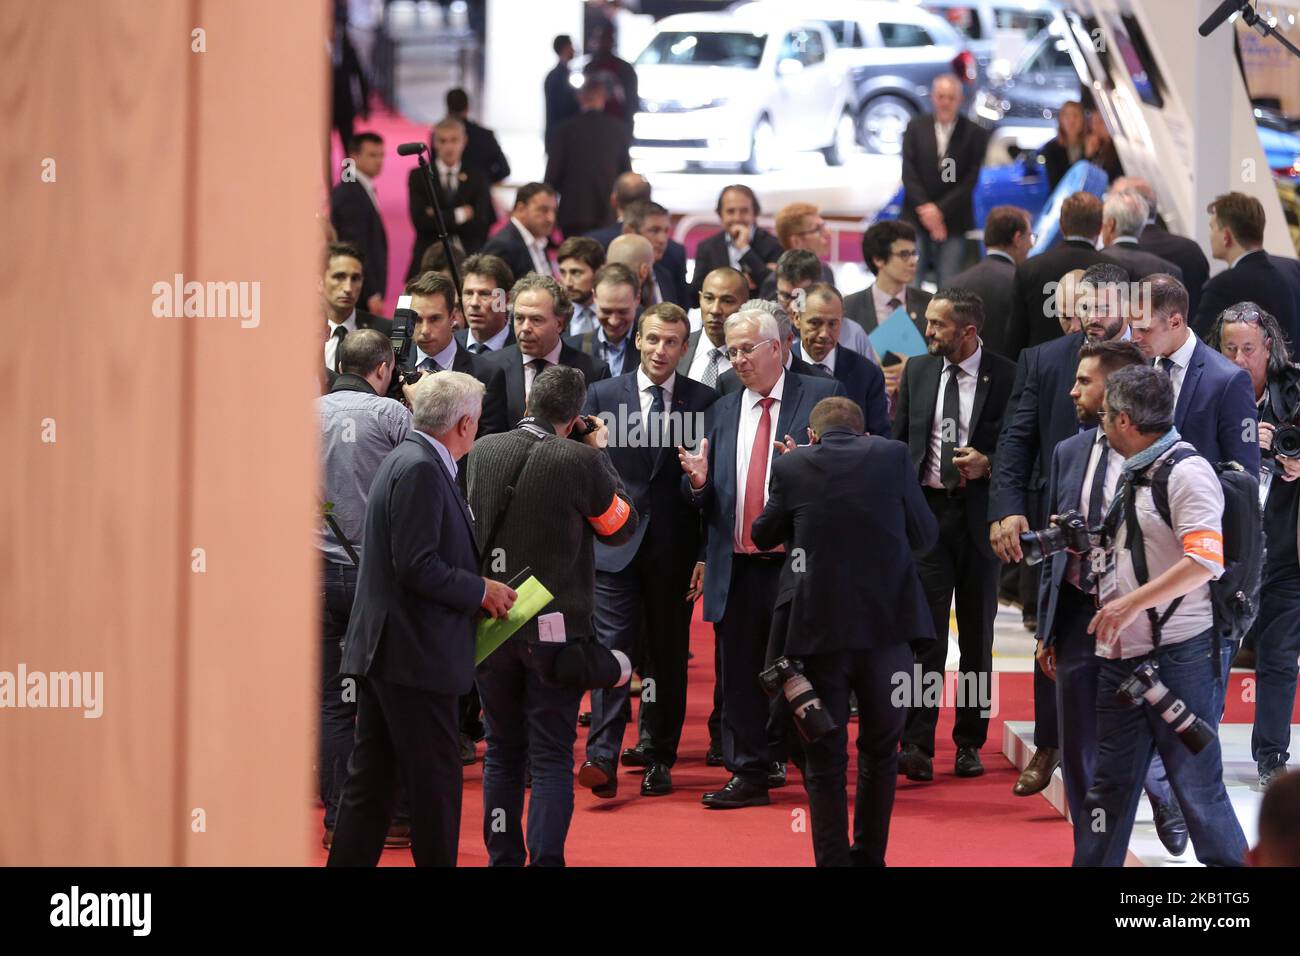 French President Emmanuel Macron (C) flanked by head of French auto industry lobby PFA Luc Chatel (L) speaks with CEO of France-based multinational automotive supplier Valeo Jacques Aschenbroich (R) during an official visit at the Paris auto show in Paris, France on October 3, 2018. From October 4 - October 14, the famous motor show will showcase new cars and products from major motoring manufacturers. (Photo by Michel Stoupak/NurPhoto) Stock Photo